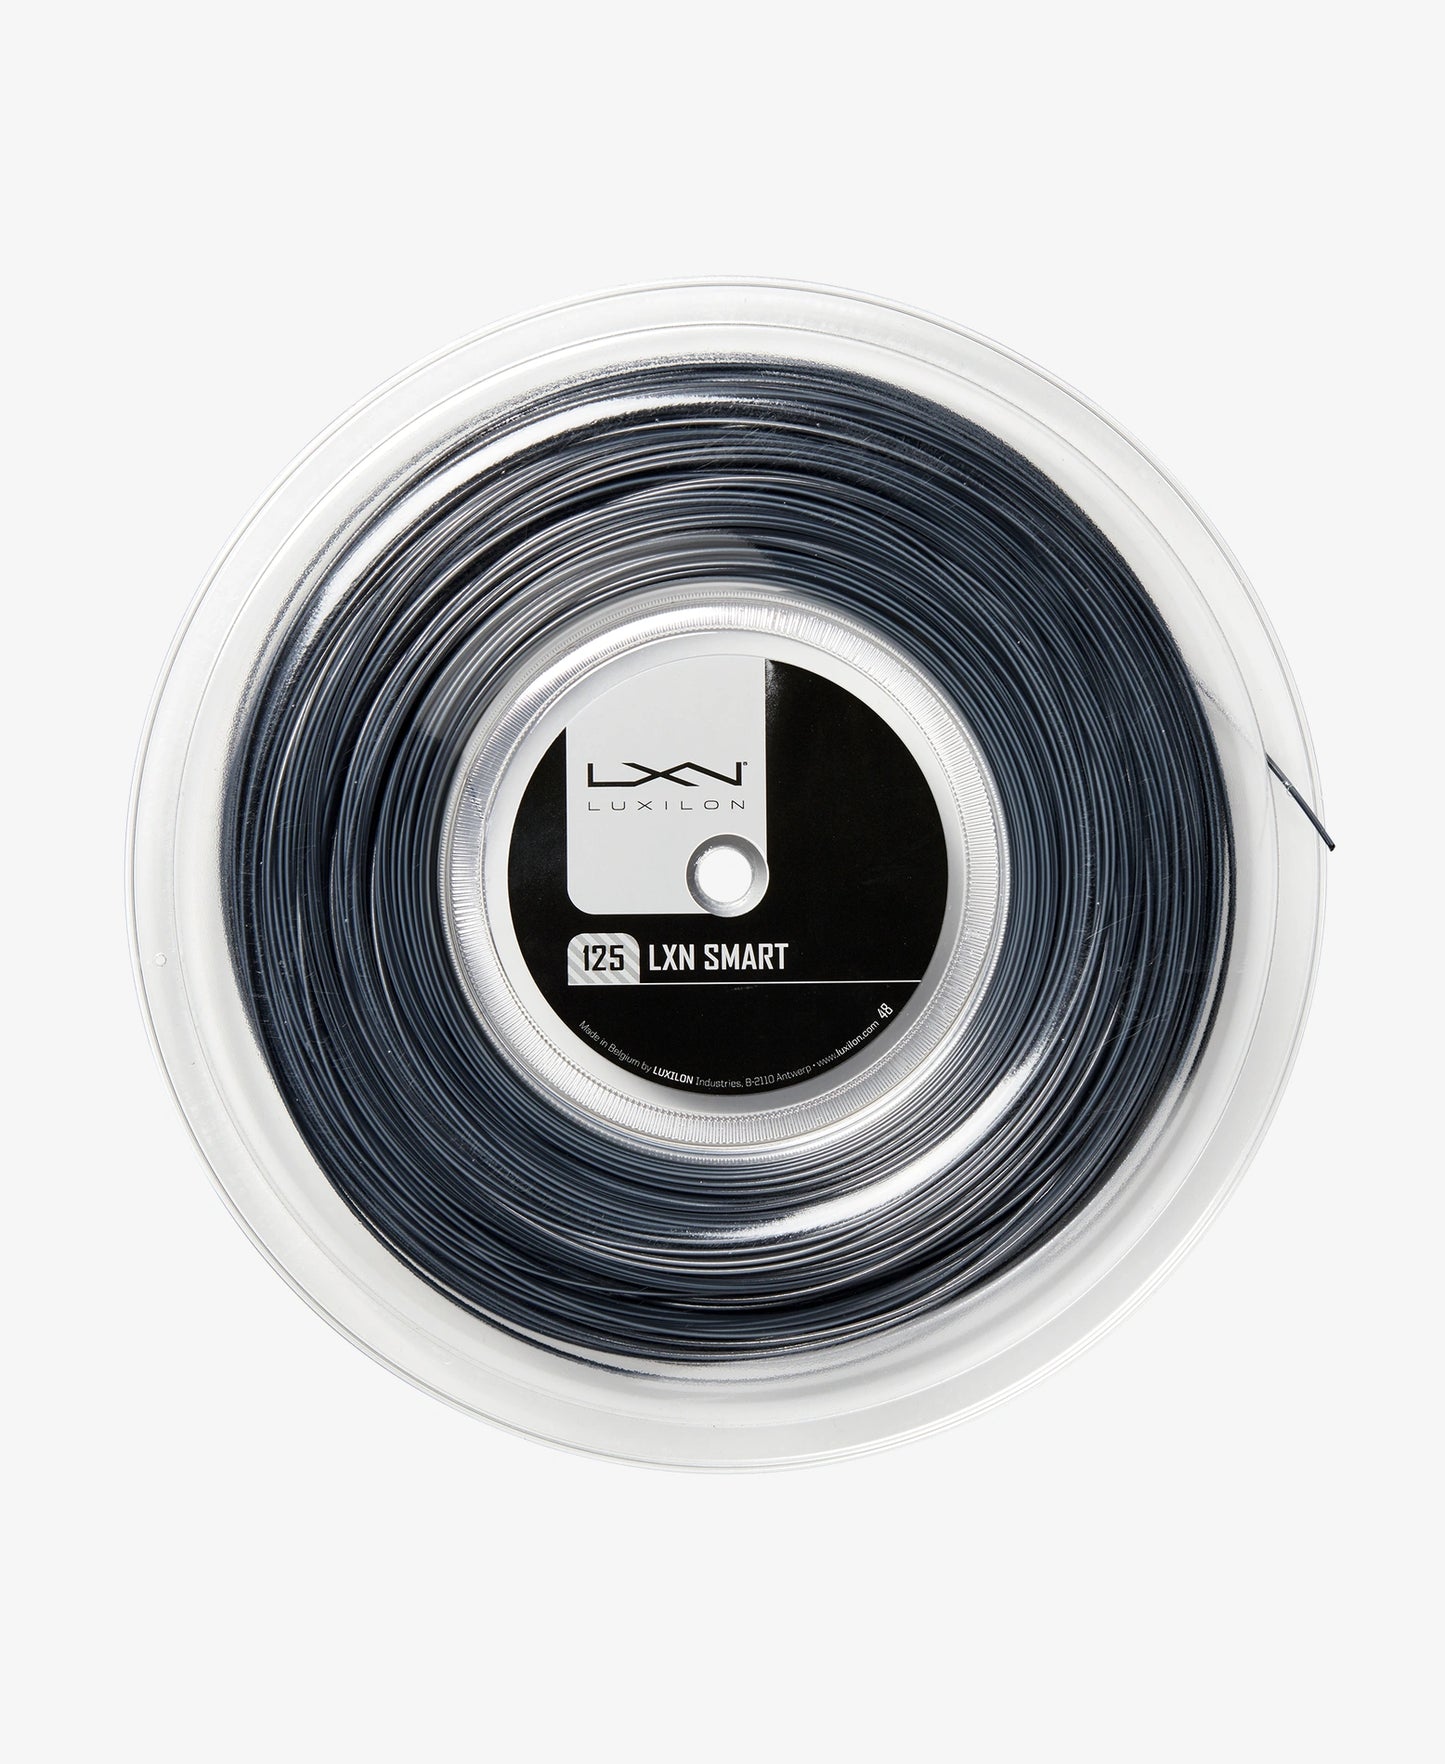 The 200 metre reel of Luxilon Smart 125 Tennis String available for sale at GSM Sports.     